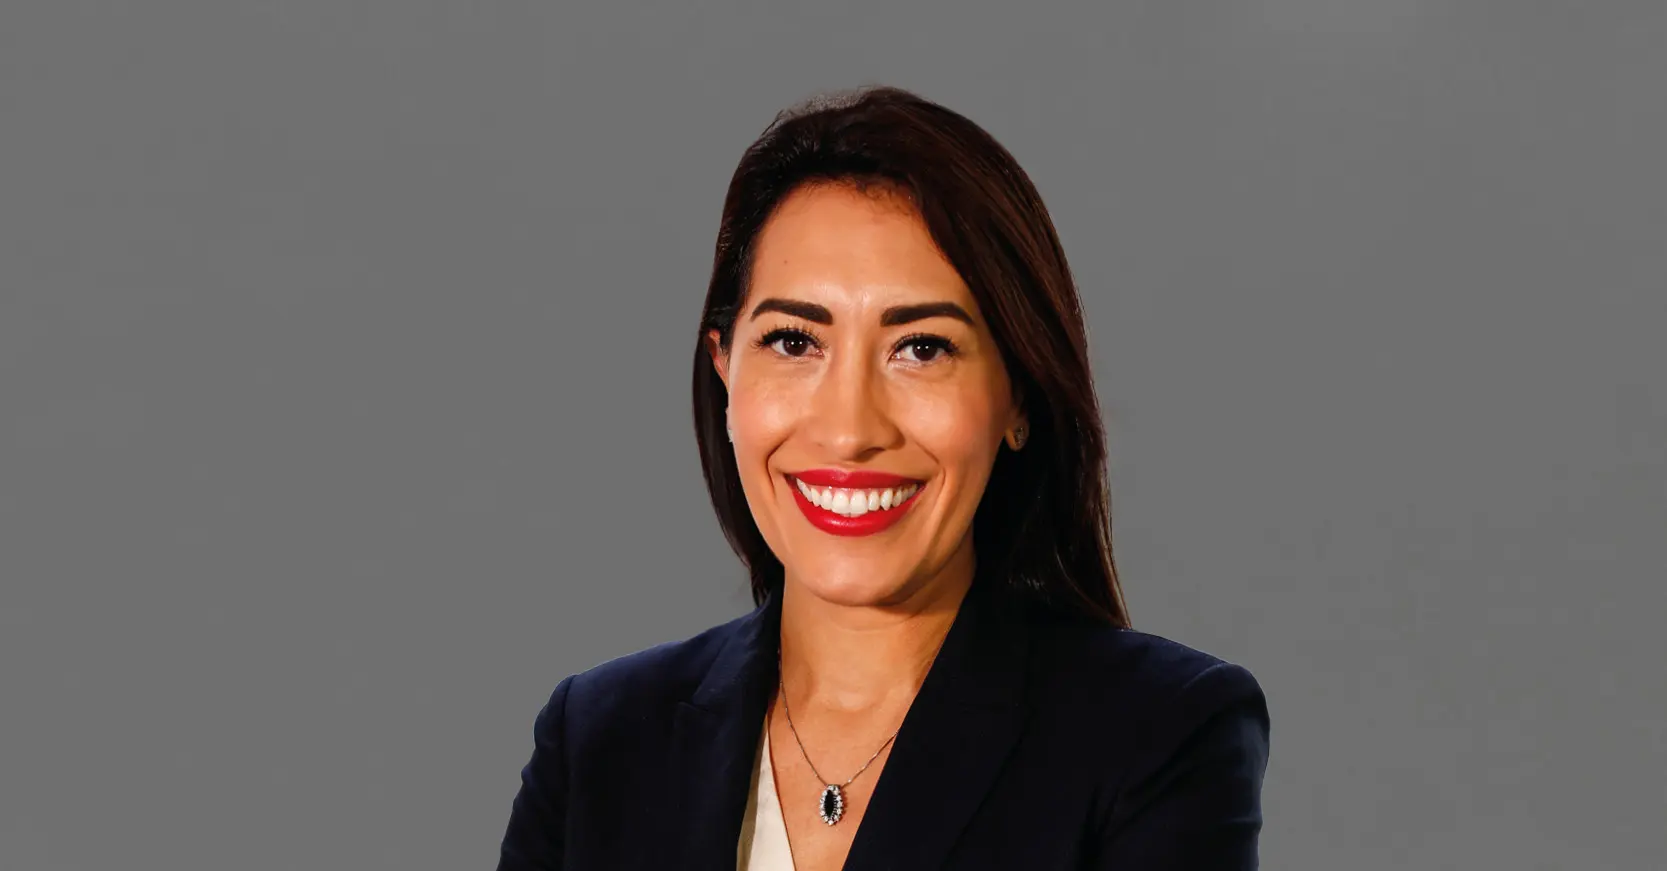 Ana María Sánchez joins Finance and Infrastructure Practice as new partner